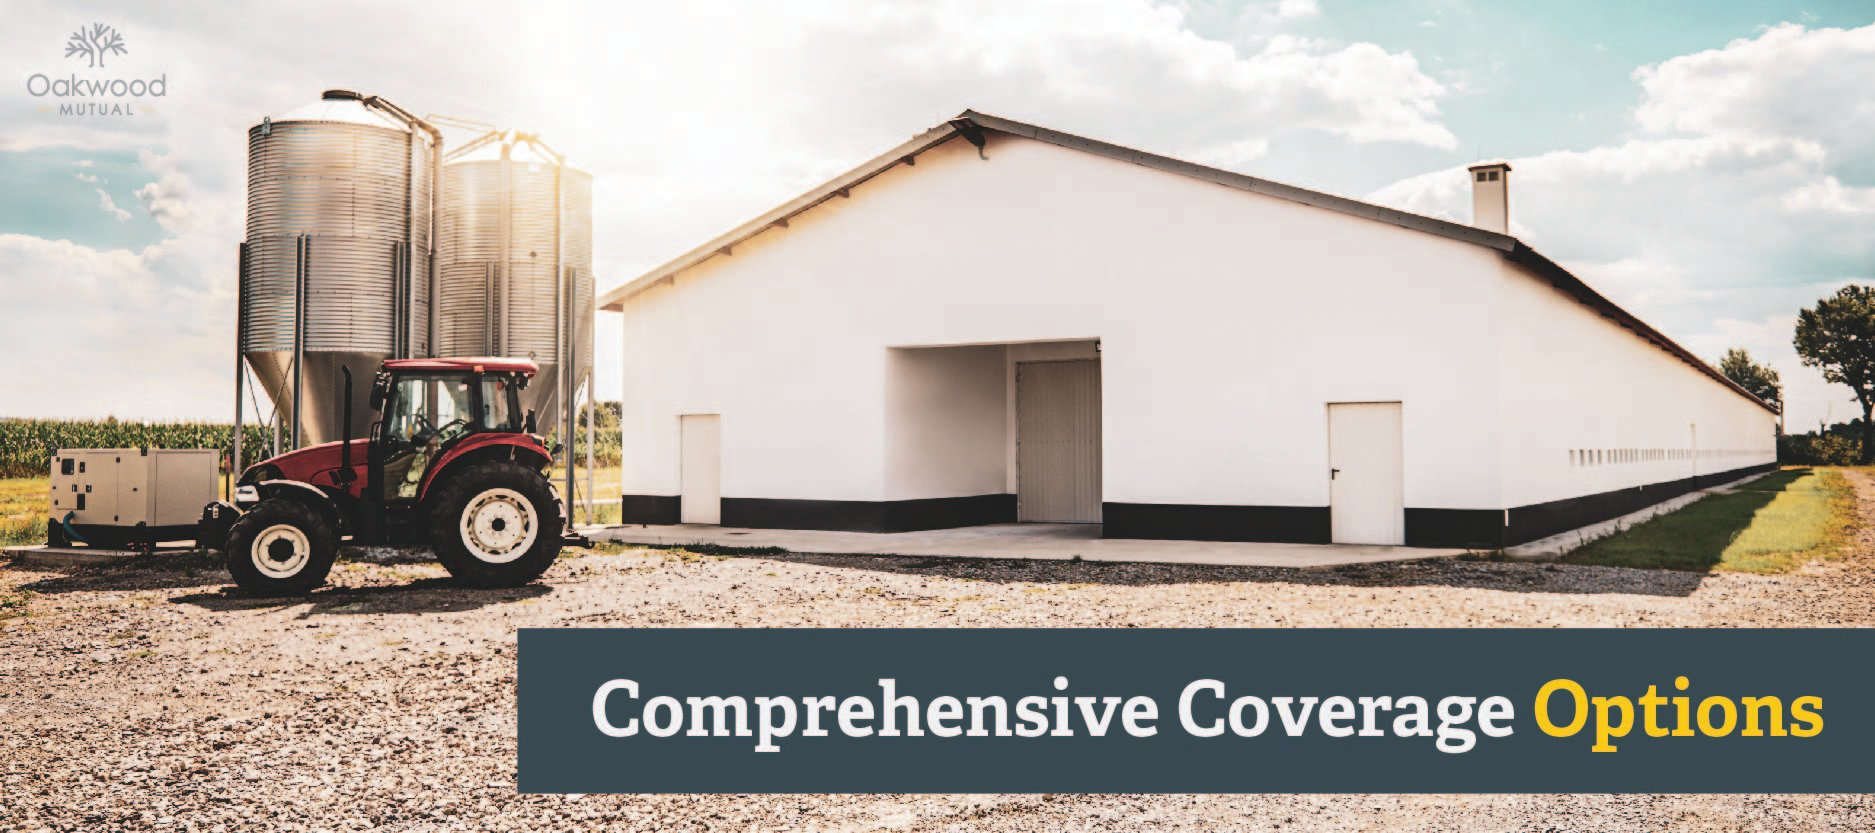 2. 7301_Comprehensive Coverage Options